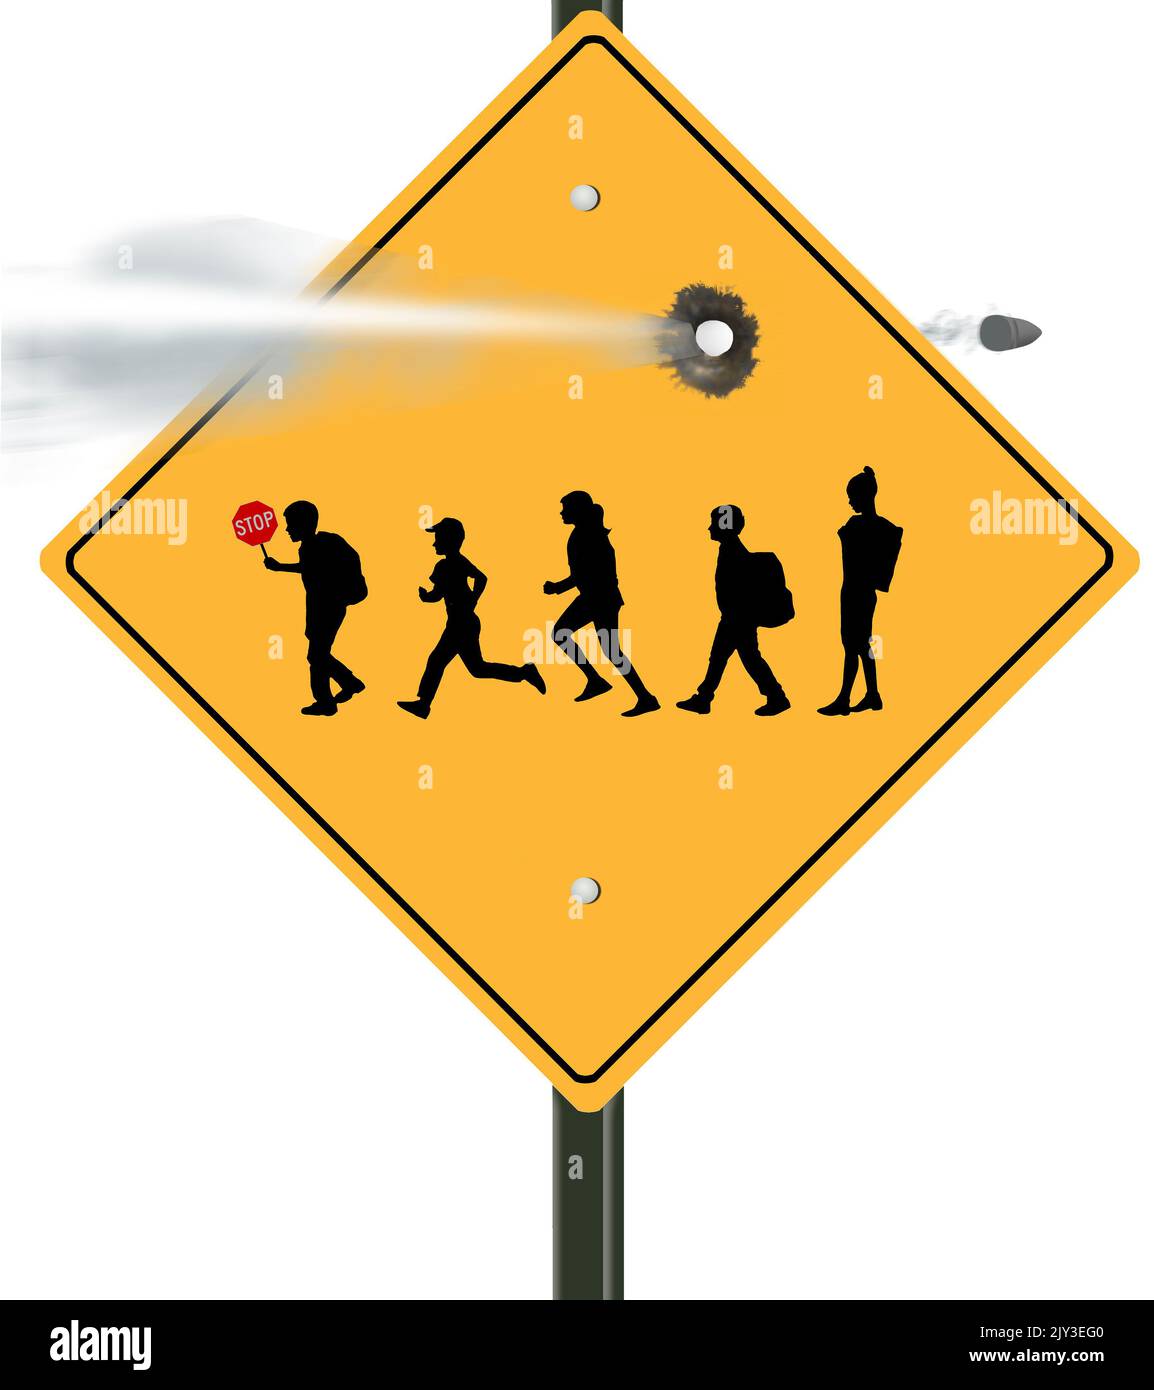 A bullet hole is seen in a school crossing sign in a 3-d illustration about school mass shootings. Stock Photo